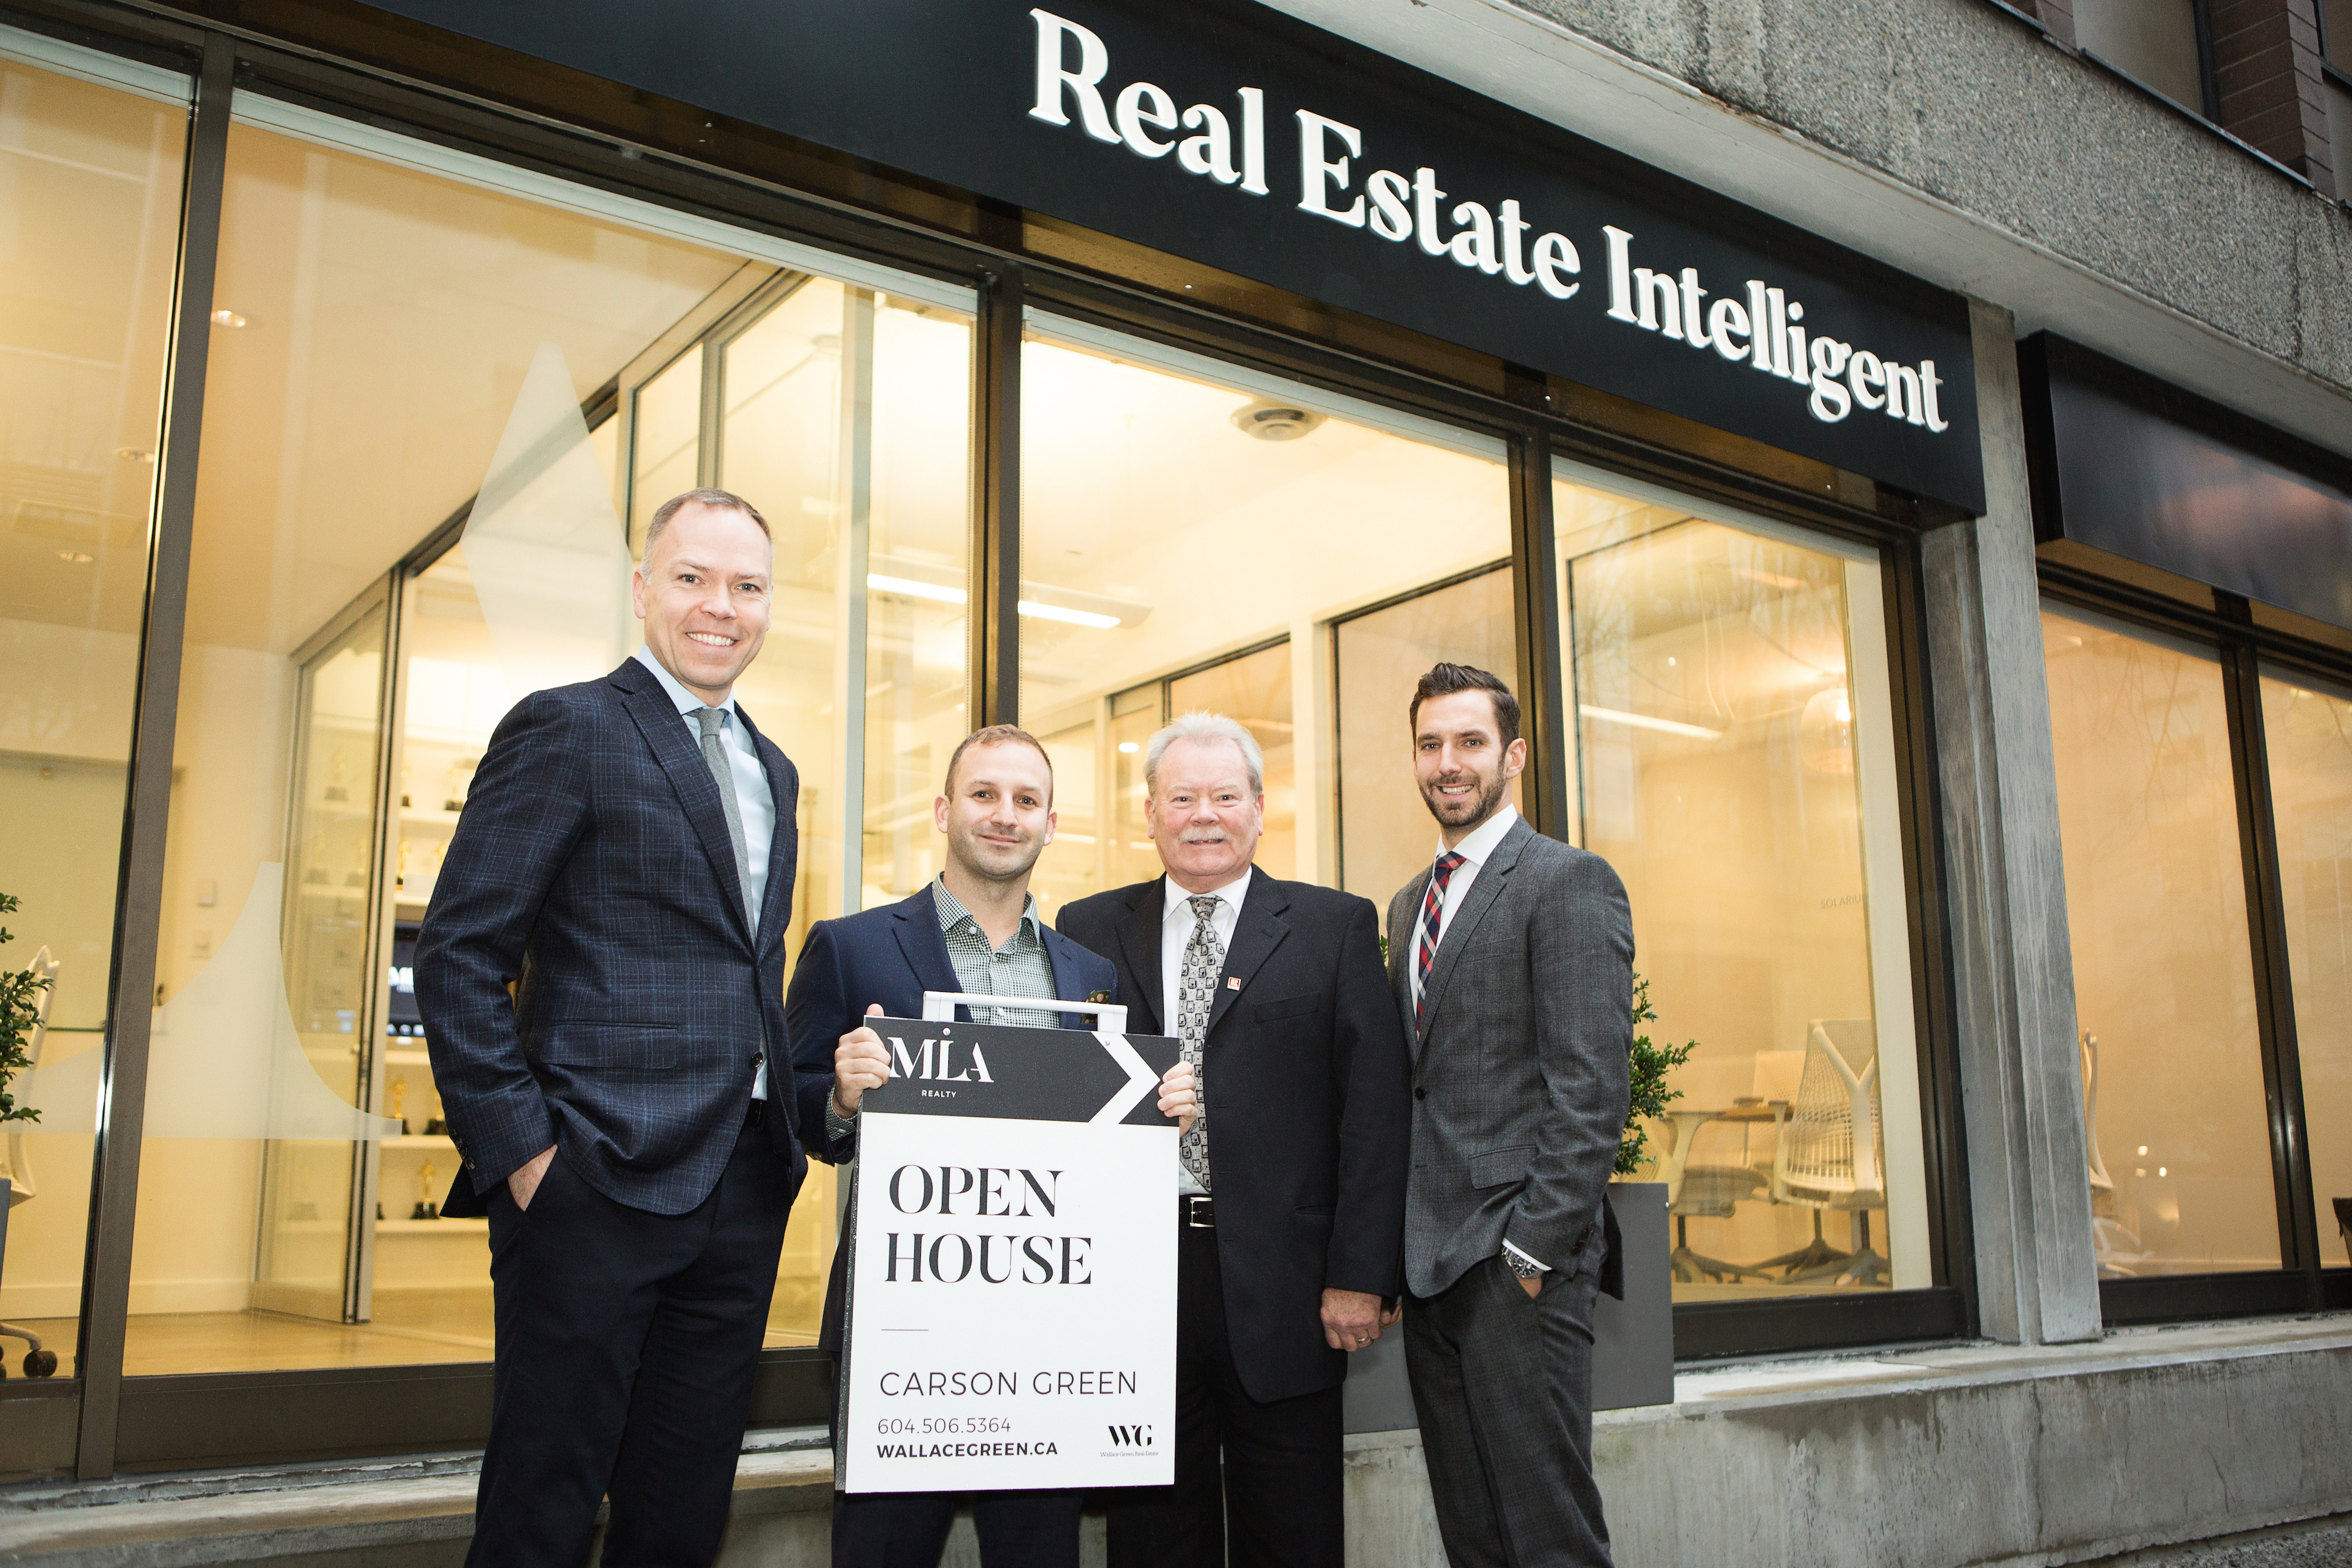 (L to R) Cameron McNeill, Executive Director of MLA Canada is joined by Realtor Carson Green and Managing Broker Peter Talbot of MLA Realty, and his business partner Ryan Lalonde, President of MLA Canada to launch the rebrand of the boutique brokerage